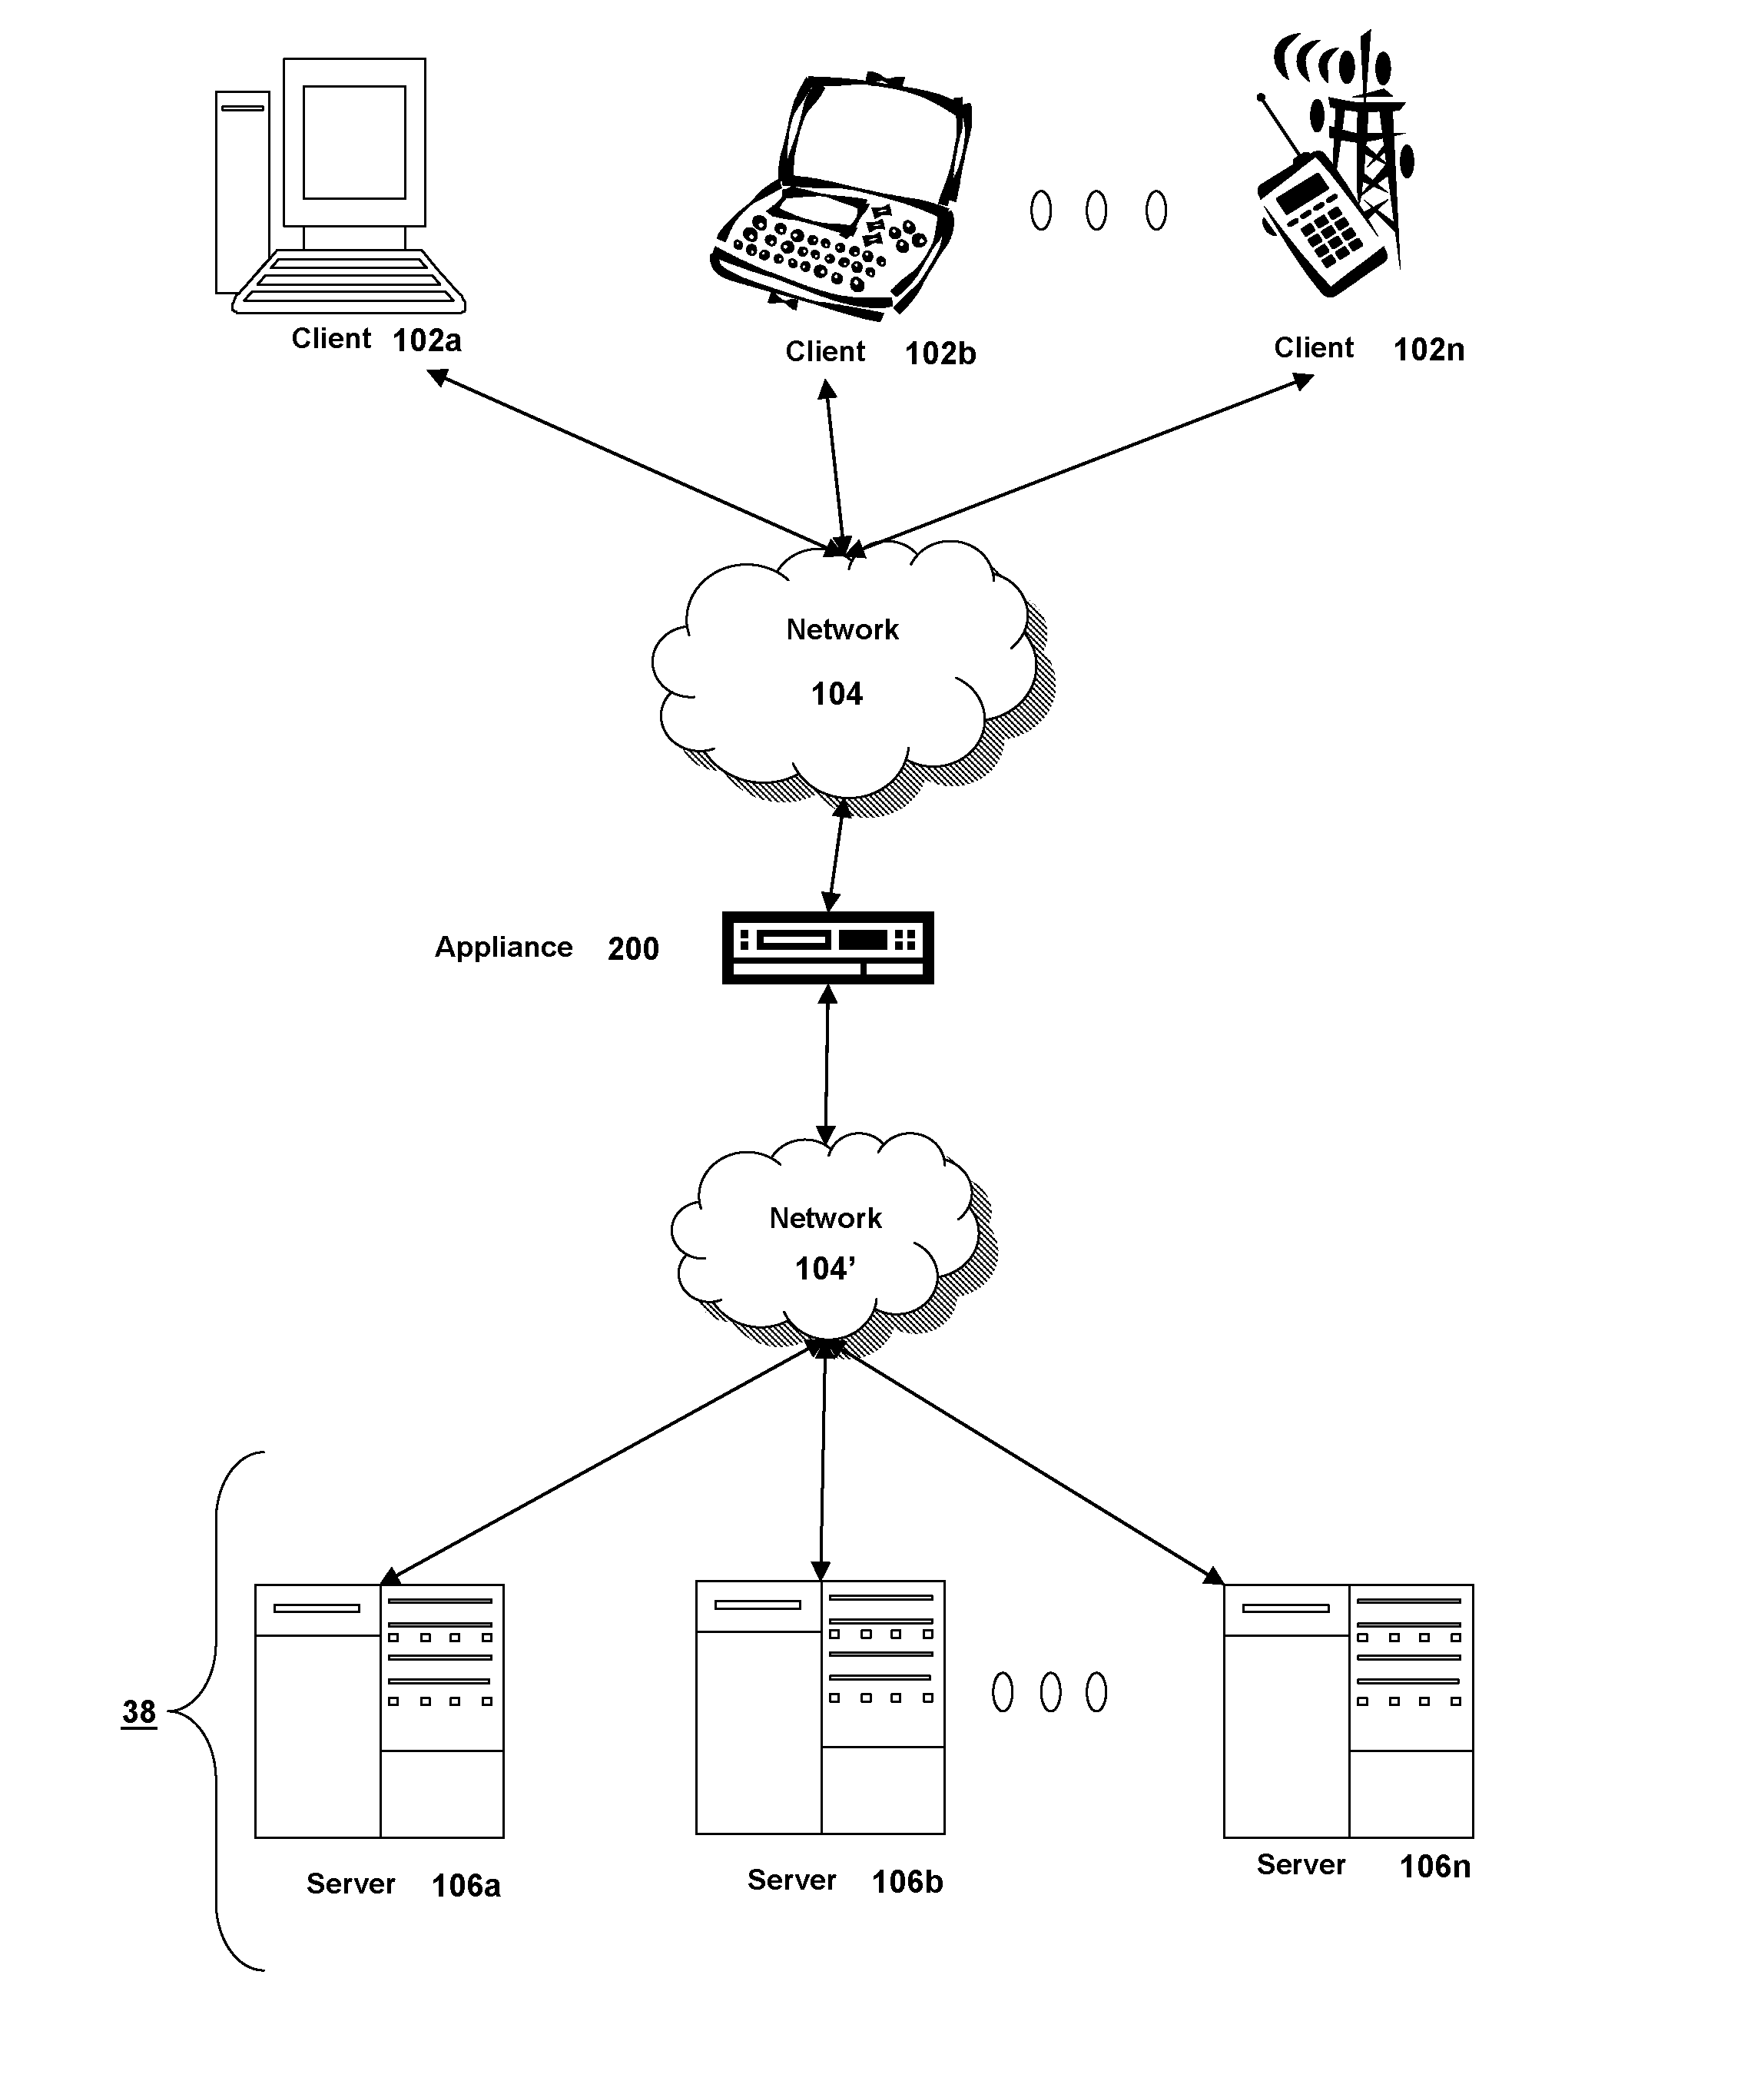 Method and appliance for authenticating, by an appliance, a client to access a virtual private network connection, based on an attribute of a client-side certificate